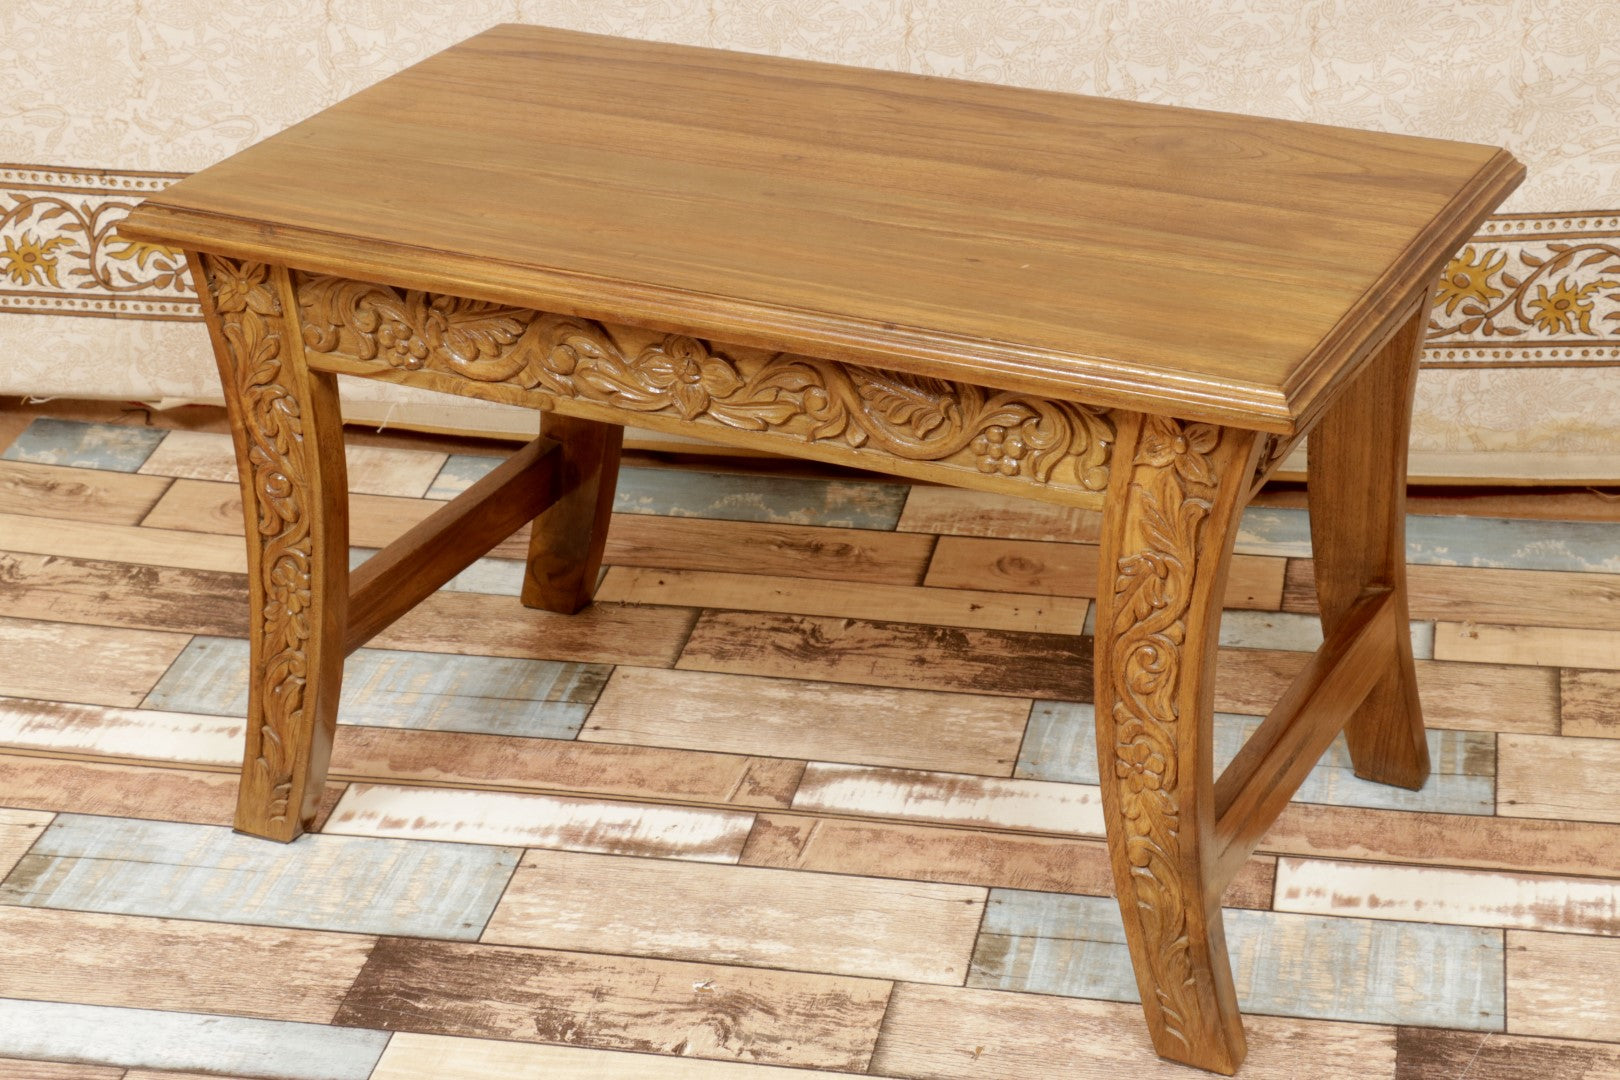 Things to Consider Before Buying a Wooden Centre Table Online